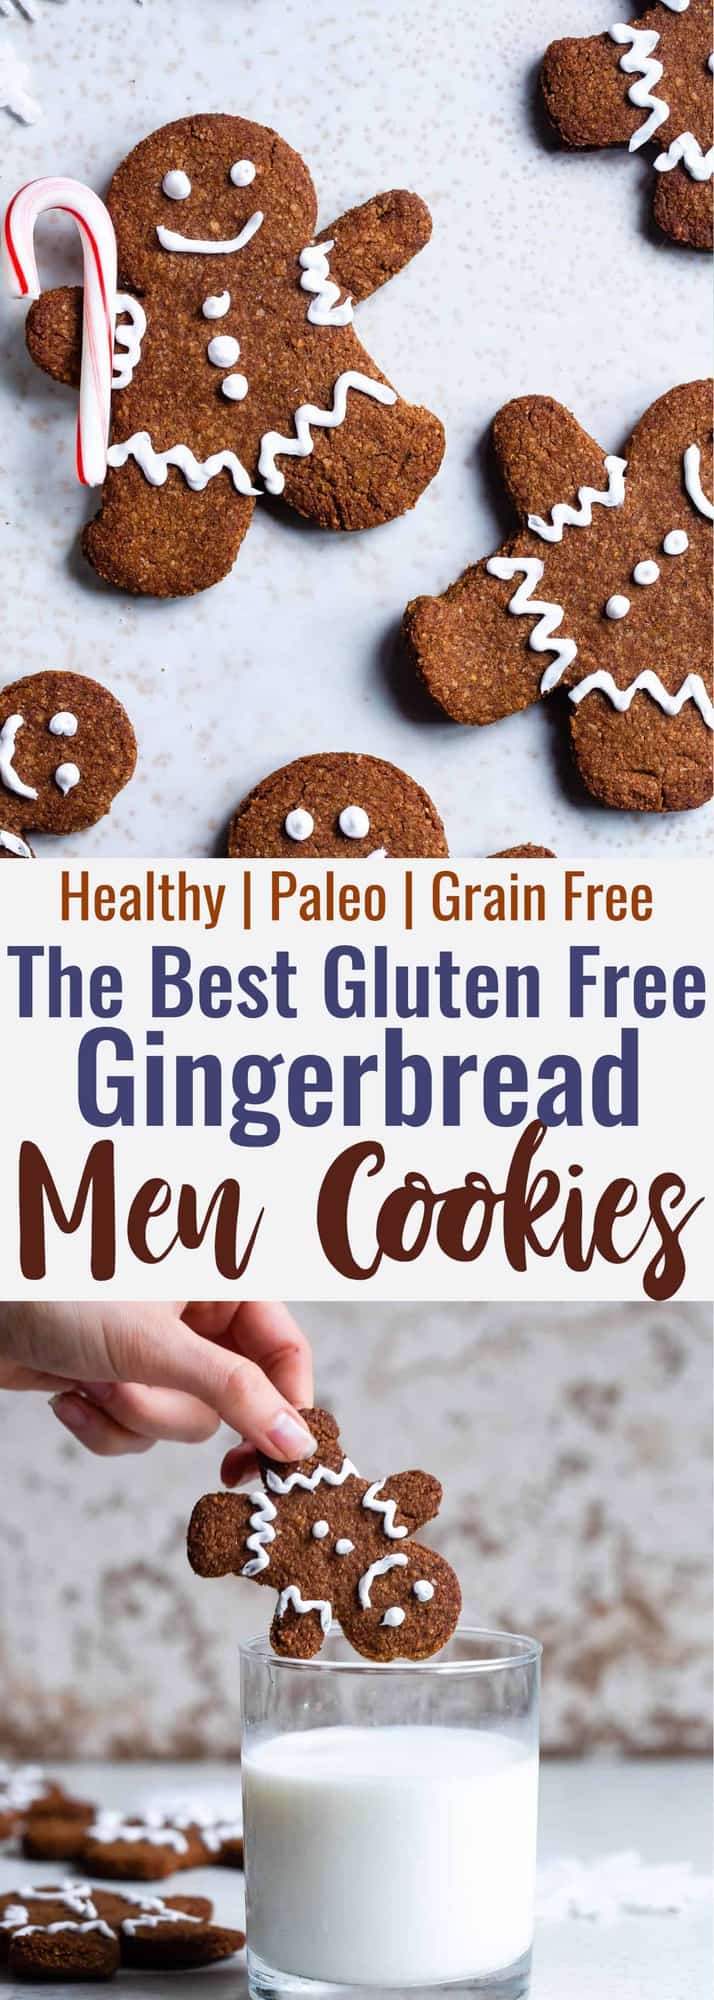 Gluten Free Paleo Healthy Gingerbread Cookies - These gingerbread cookies are perfectly spicy, sweet and crispy! An easy, delicious holiday cookie that no one will know are healthy and gluten/grain/dairy/refined sugar free! | #Foodfaithfitness | #Glutenfree #paleo #Gingerbread #healthy #dairyfree